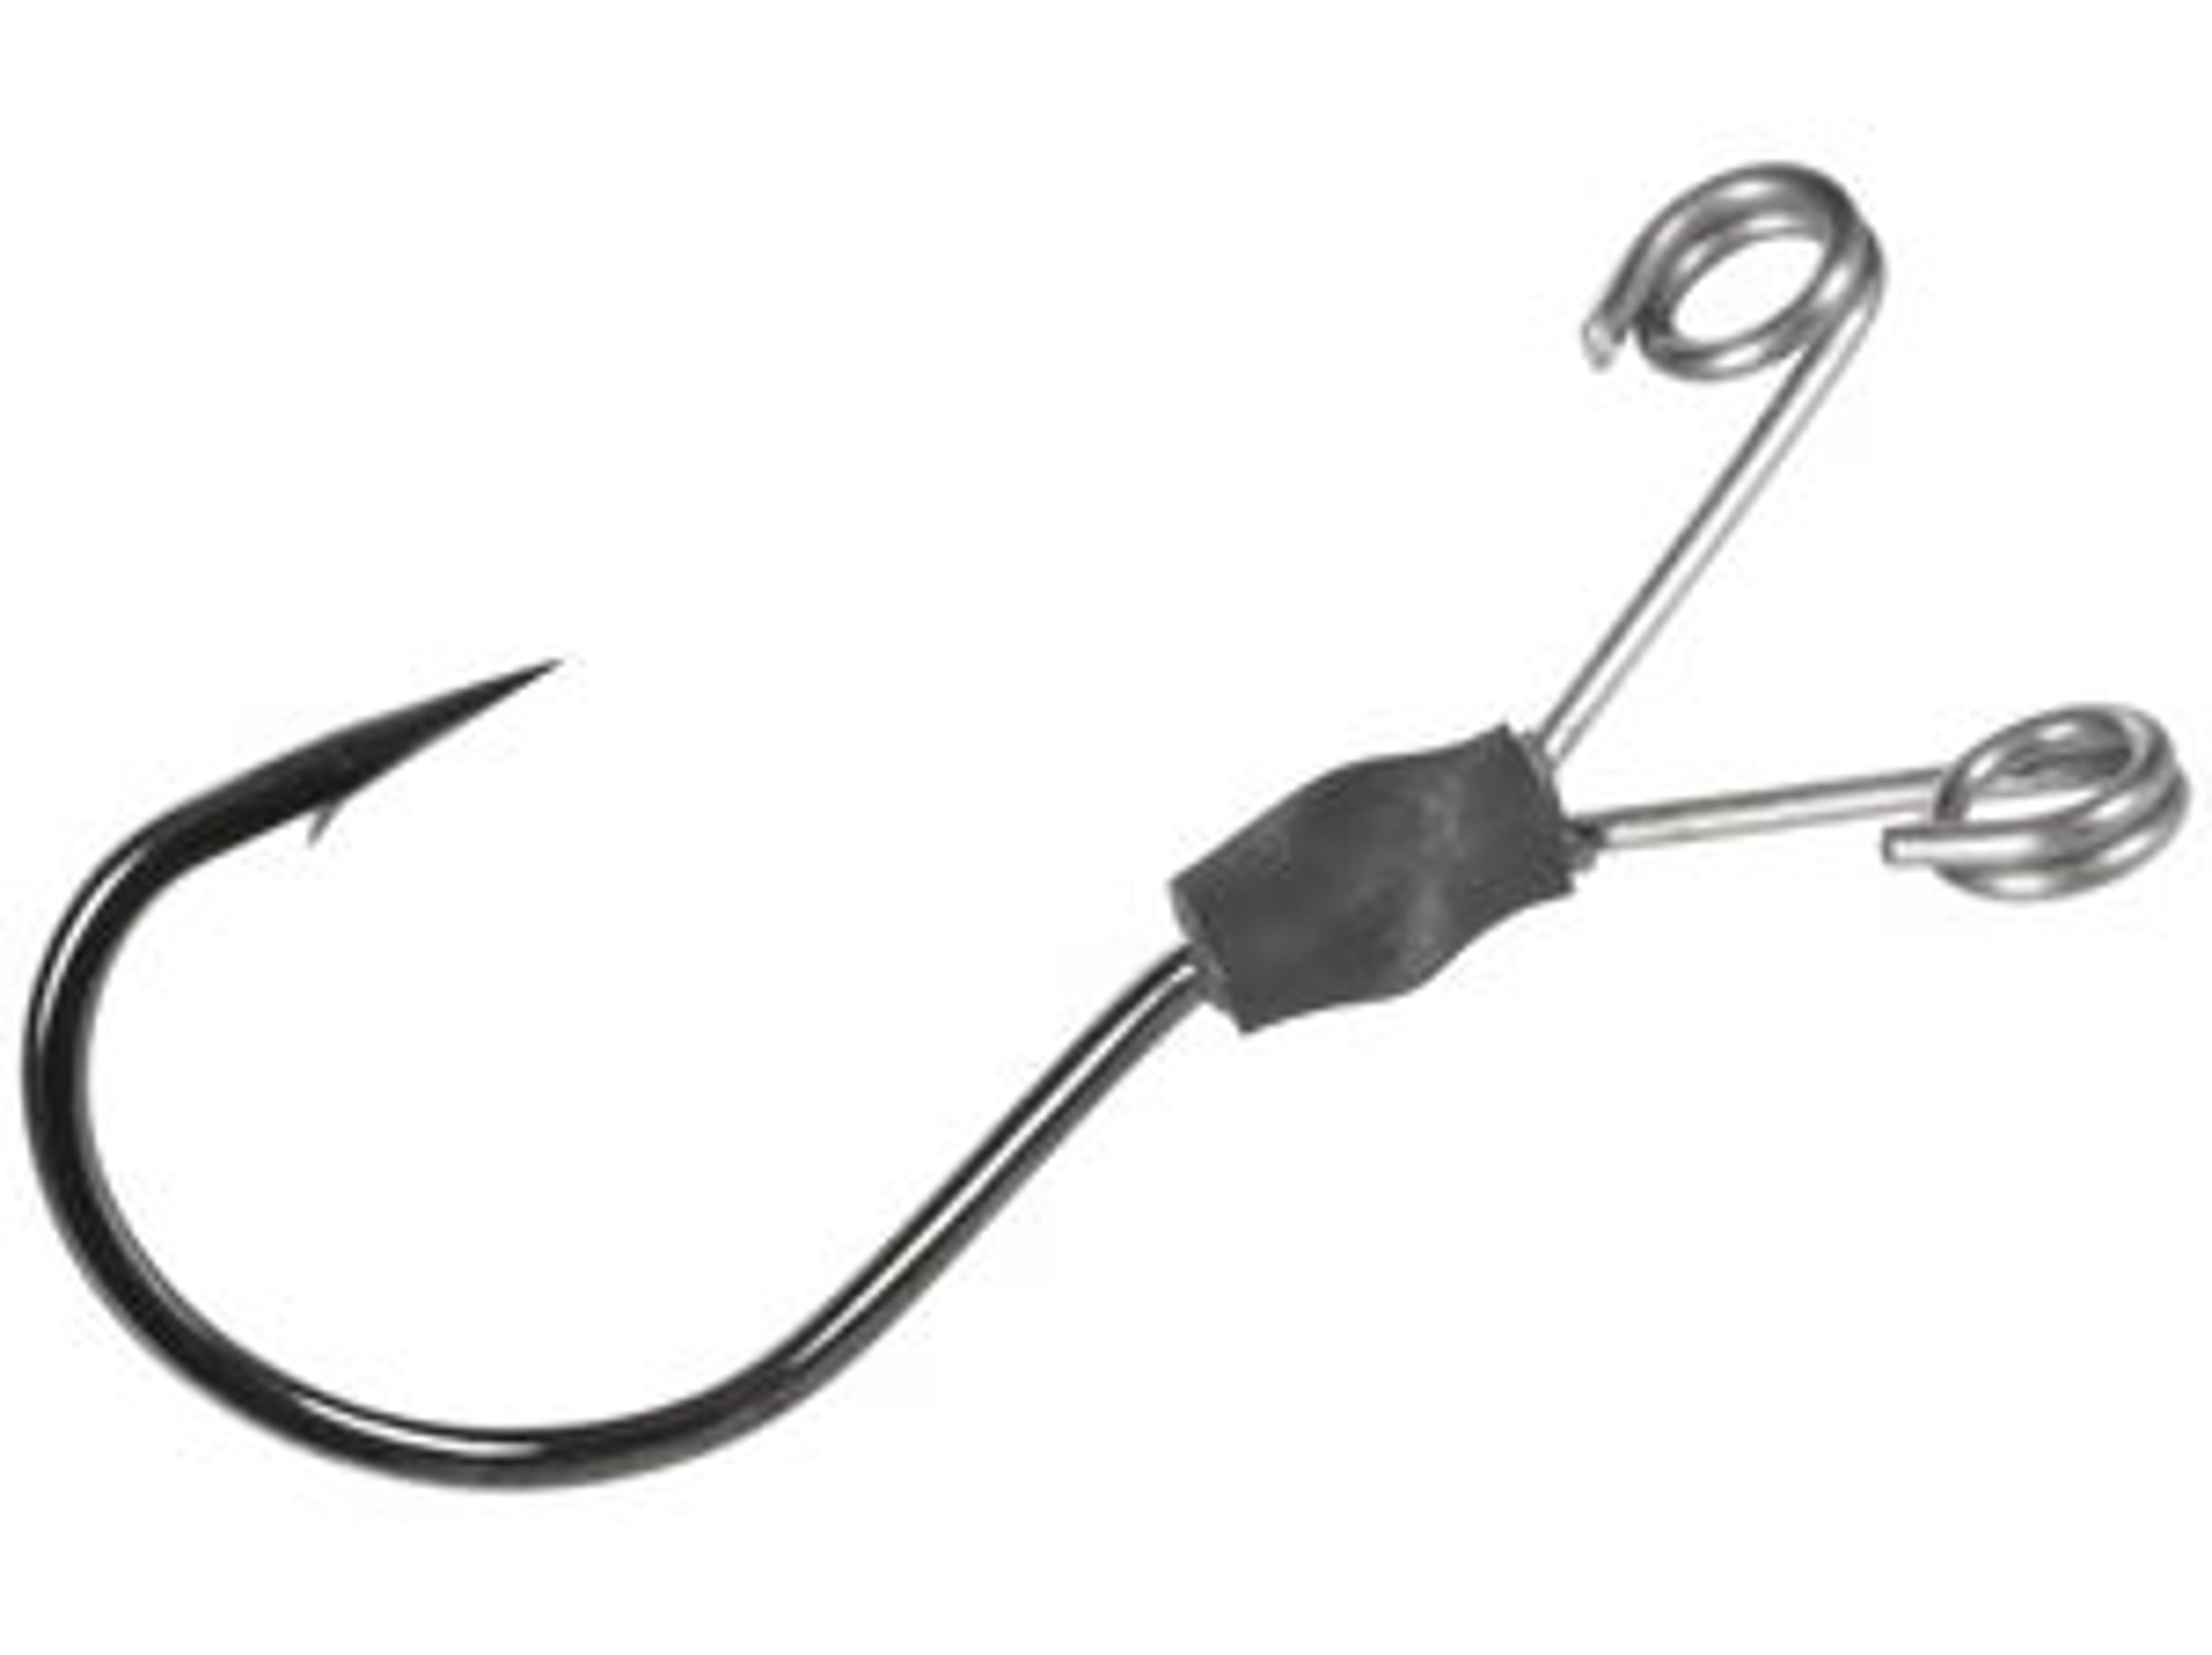  Frog Tail Hook